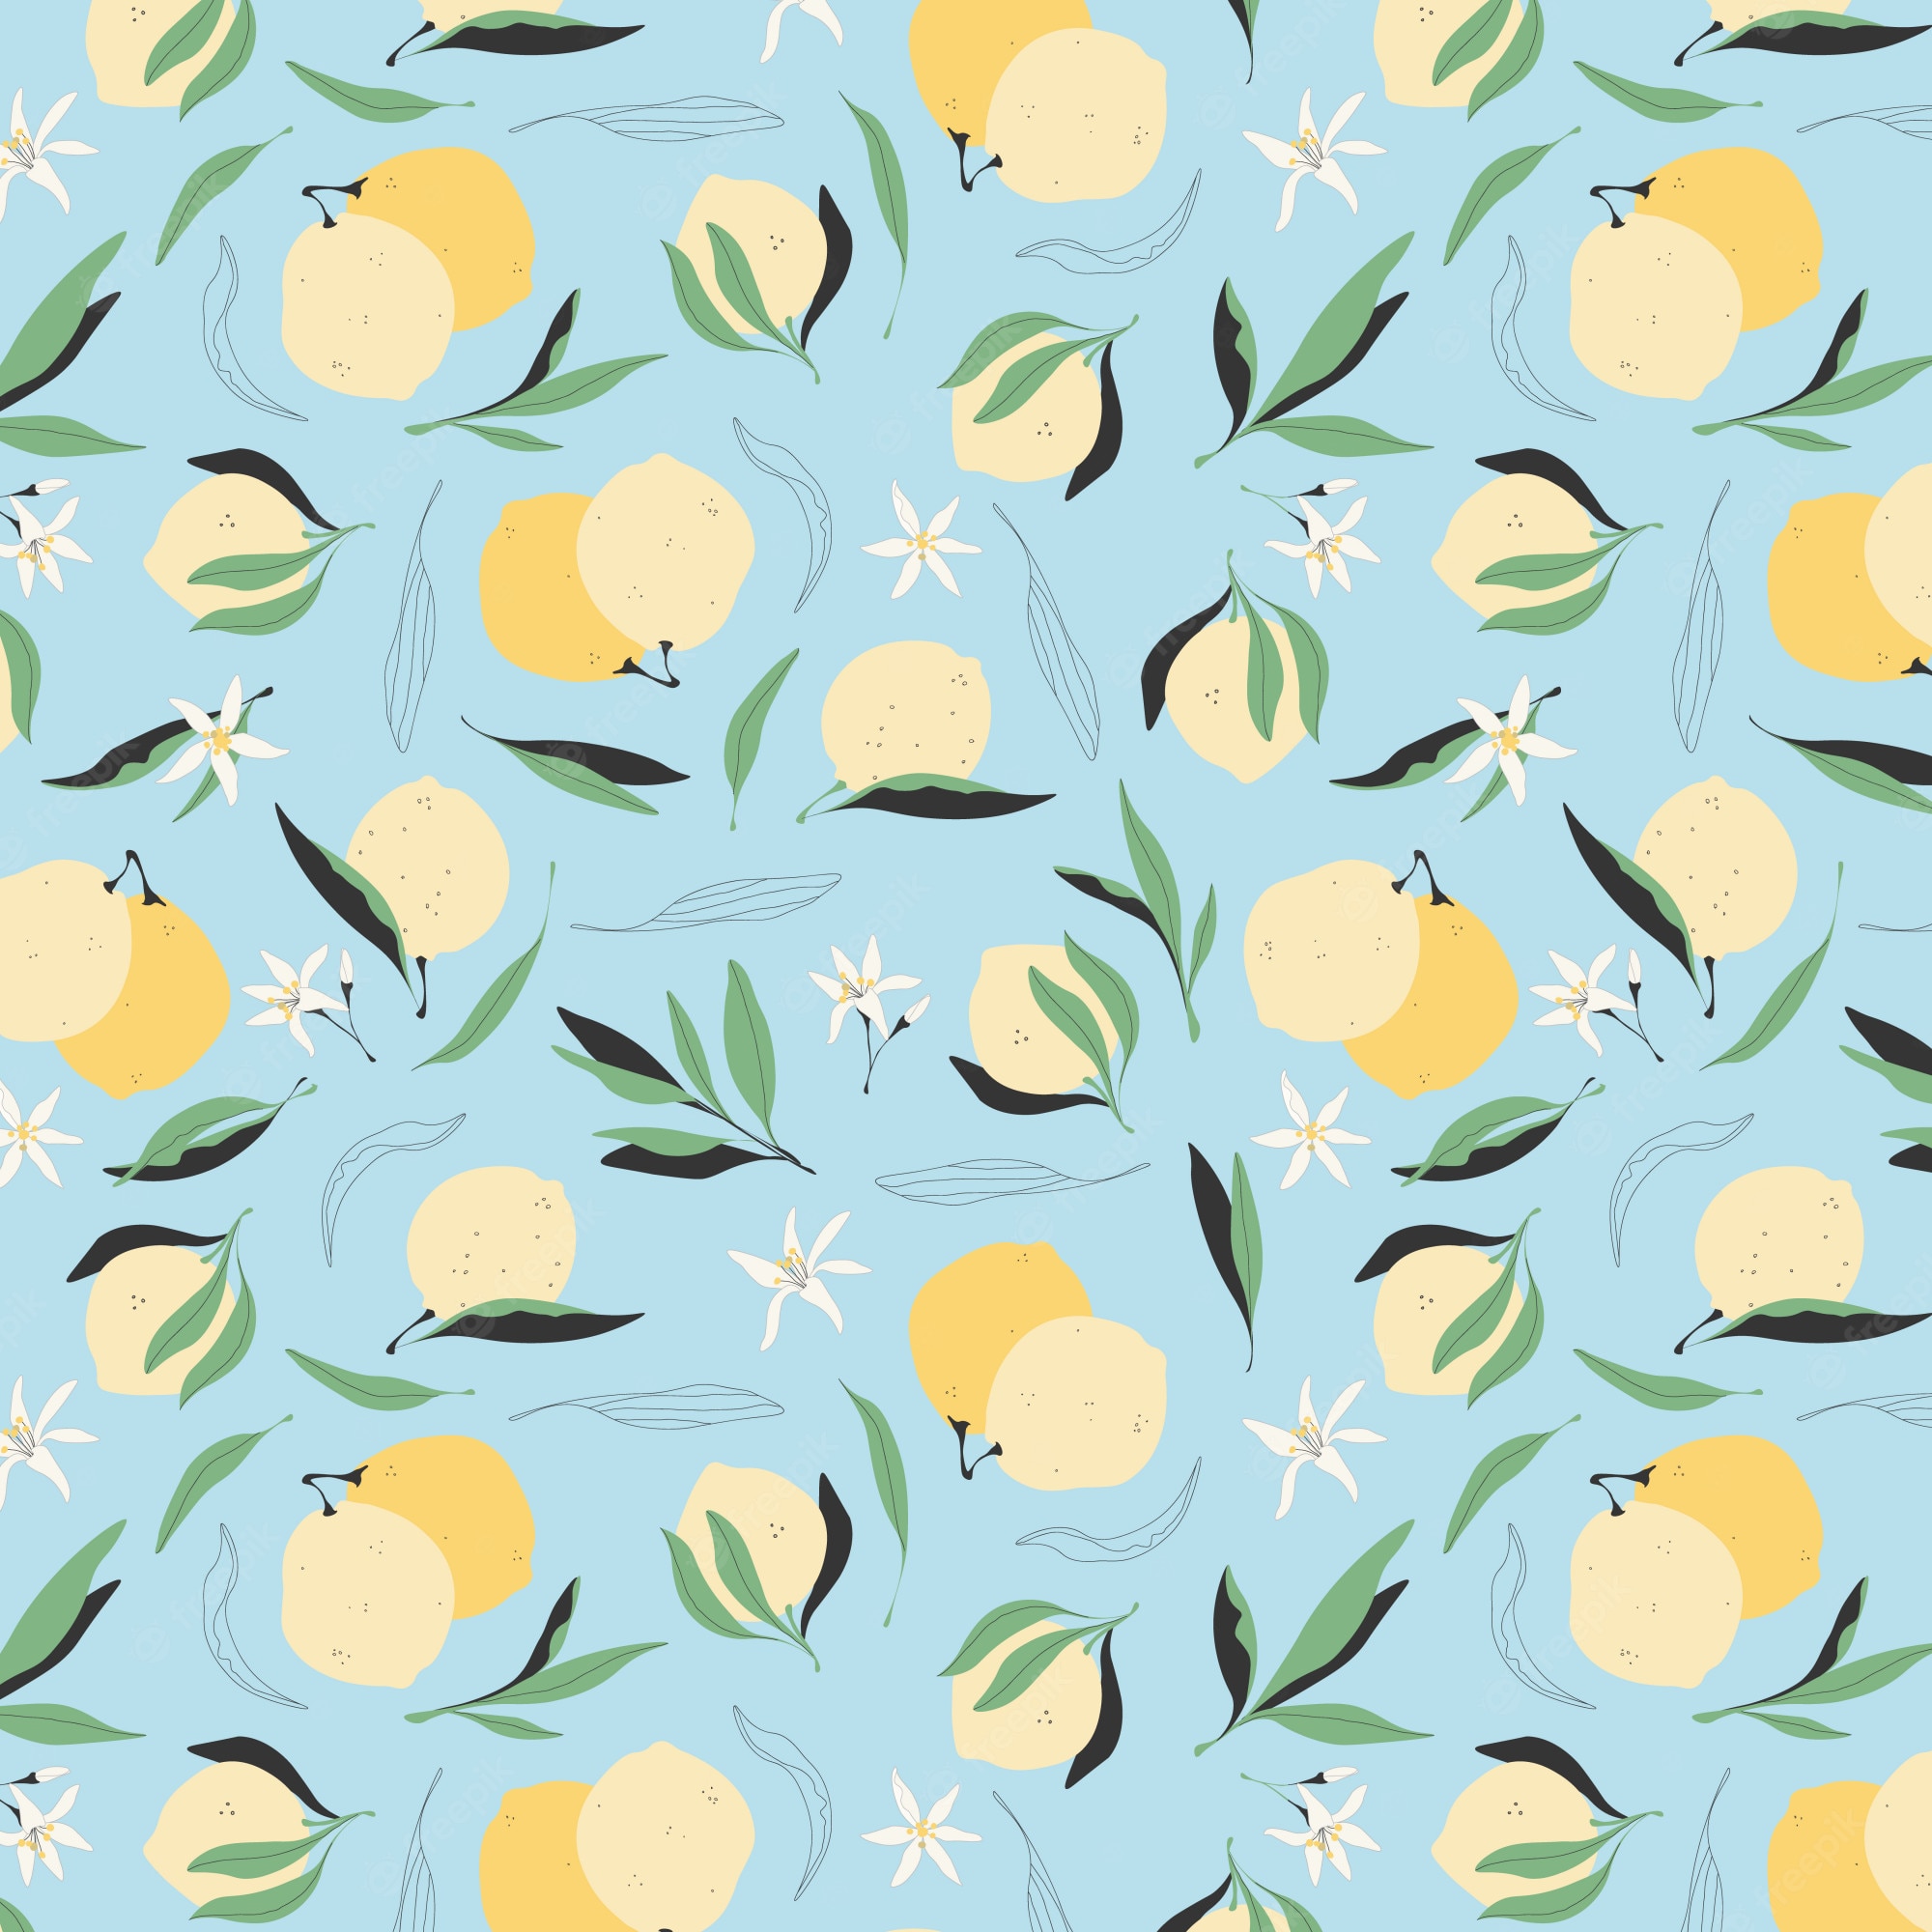 Premium Vector. Seamless Lemon Pattern. Trendy Yellow Lemons On A Blue Background. Modern Hand Drawn Illustration For Greeting Cards, Wallpaper And Wrapping Paper Design. Juicy Summer Fruit Background